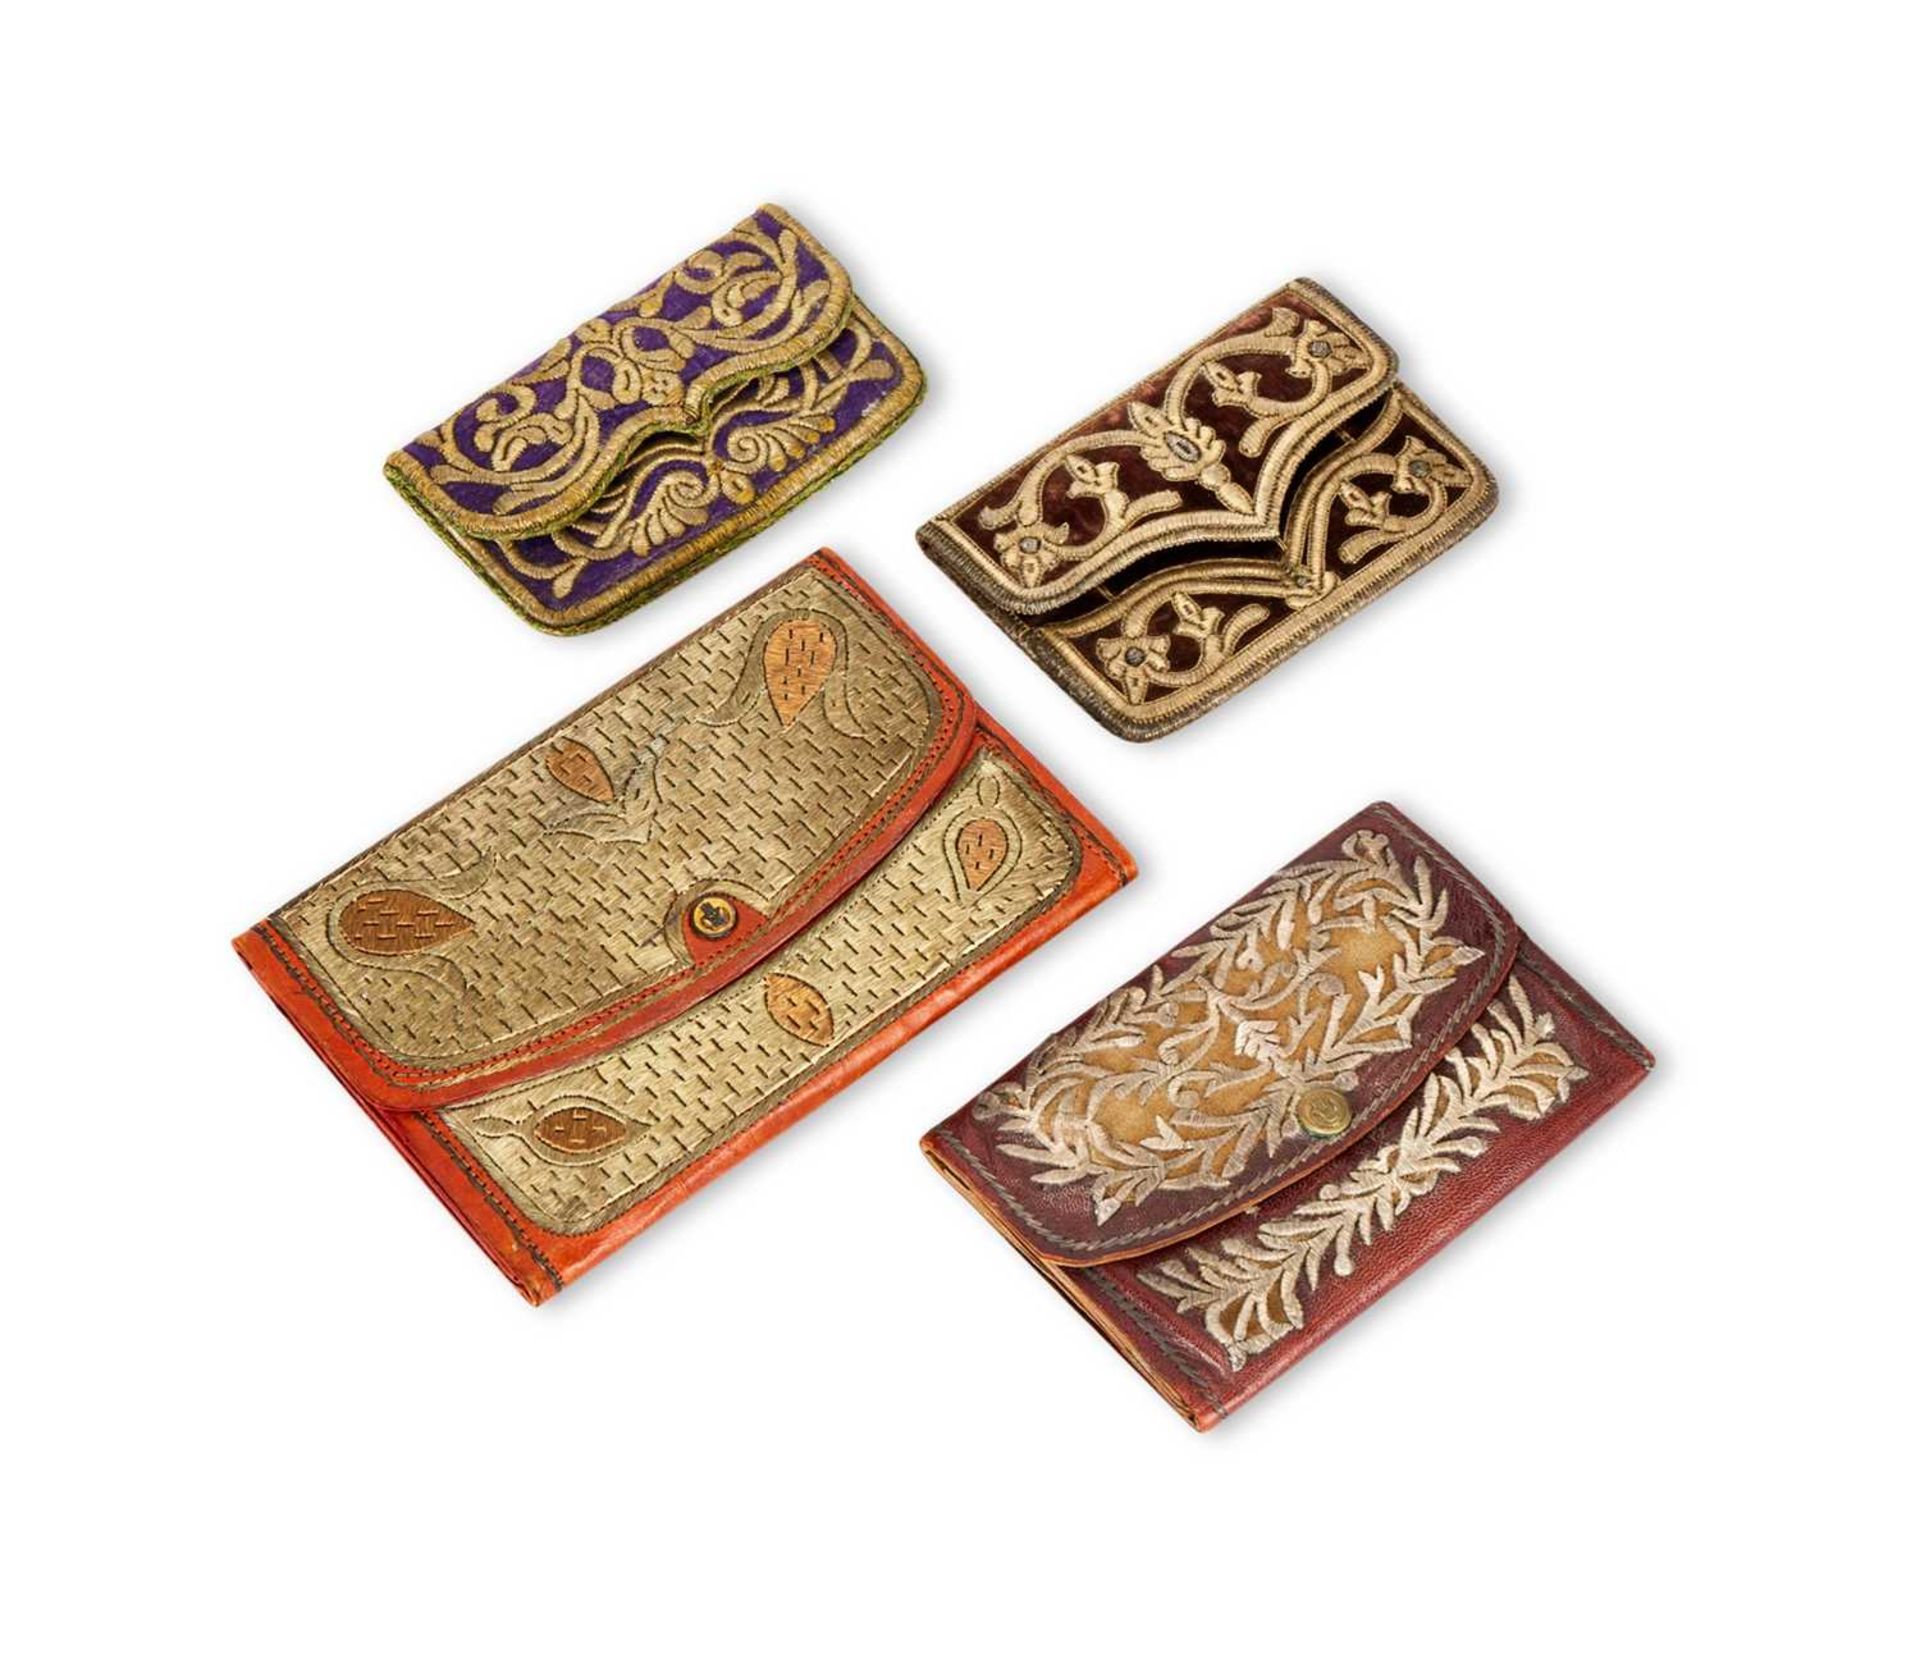 FOUR 18TH / 19TH CENTURY OTTOMAN GOLD AND SILVER THREAD EMBROIDERED BAGS